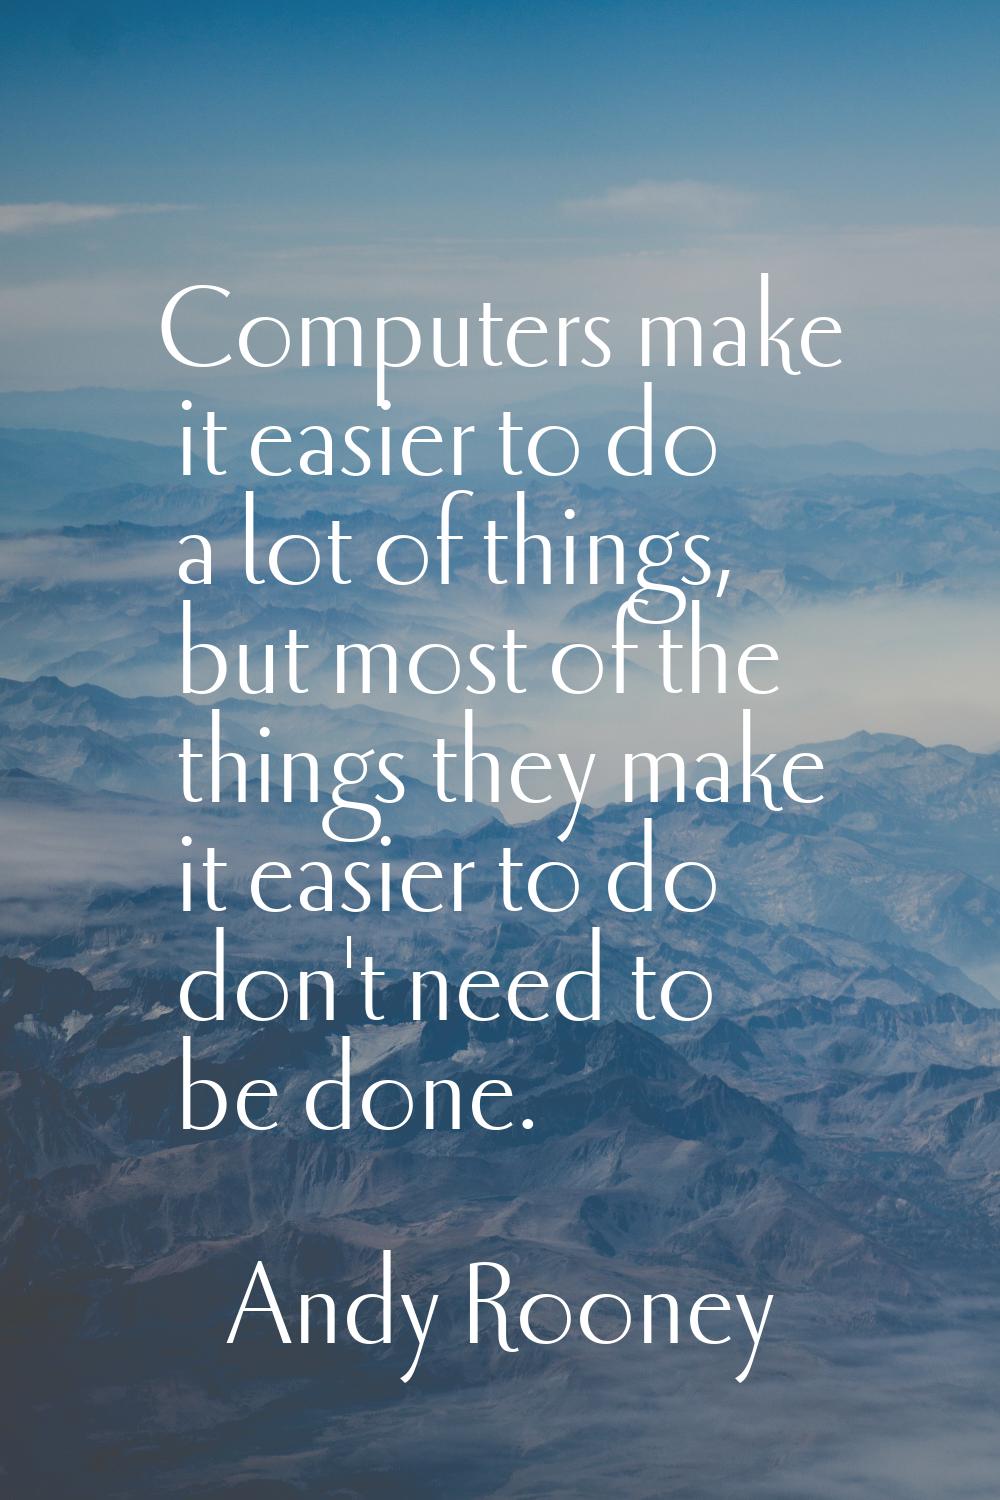 Computers make it easier to do a lot of things, but most of the things they make it easier to do do